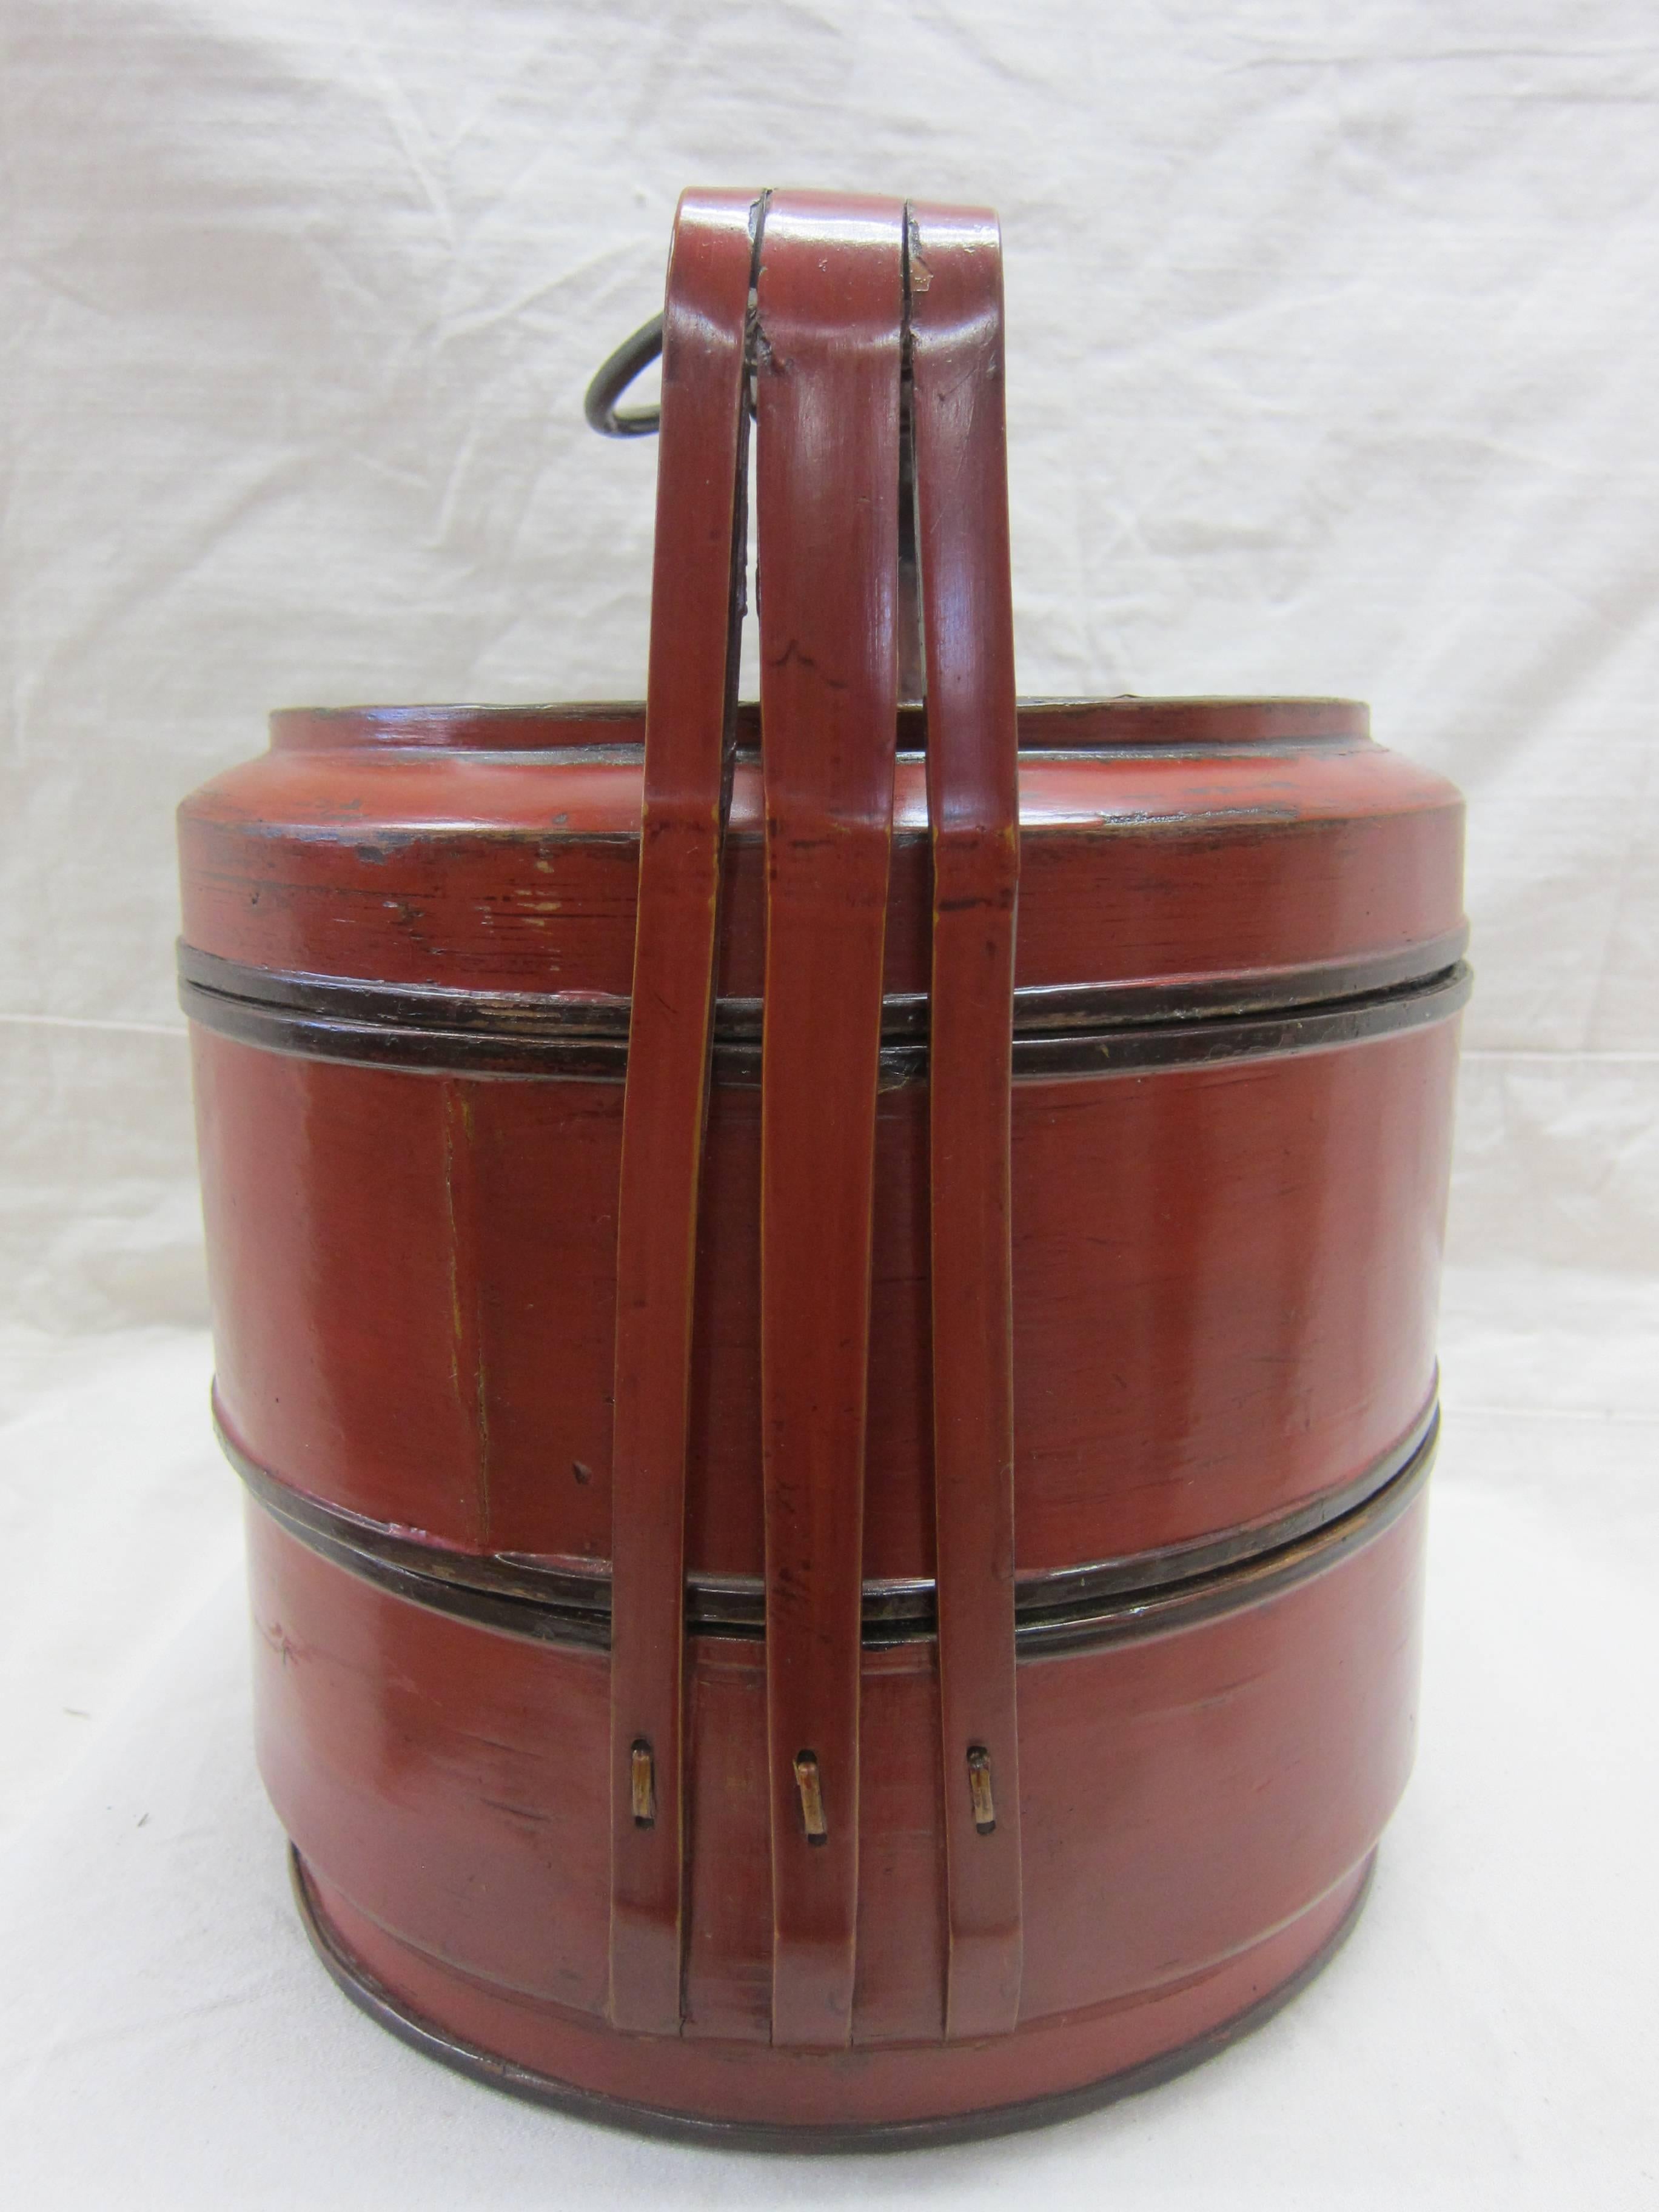 Antique basket box food caddy. Made from cypress wood and turned bamboo with red lacquer exterior. Very nice food caddy originally used for storing, transporting and serving food.
Very good condition.